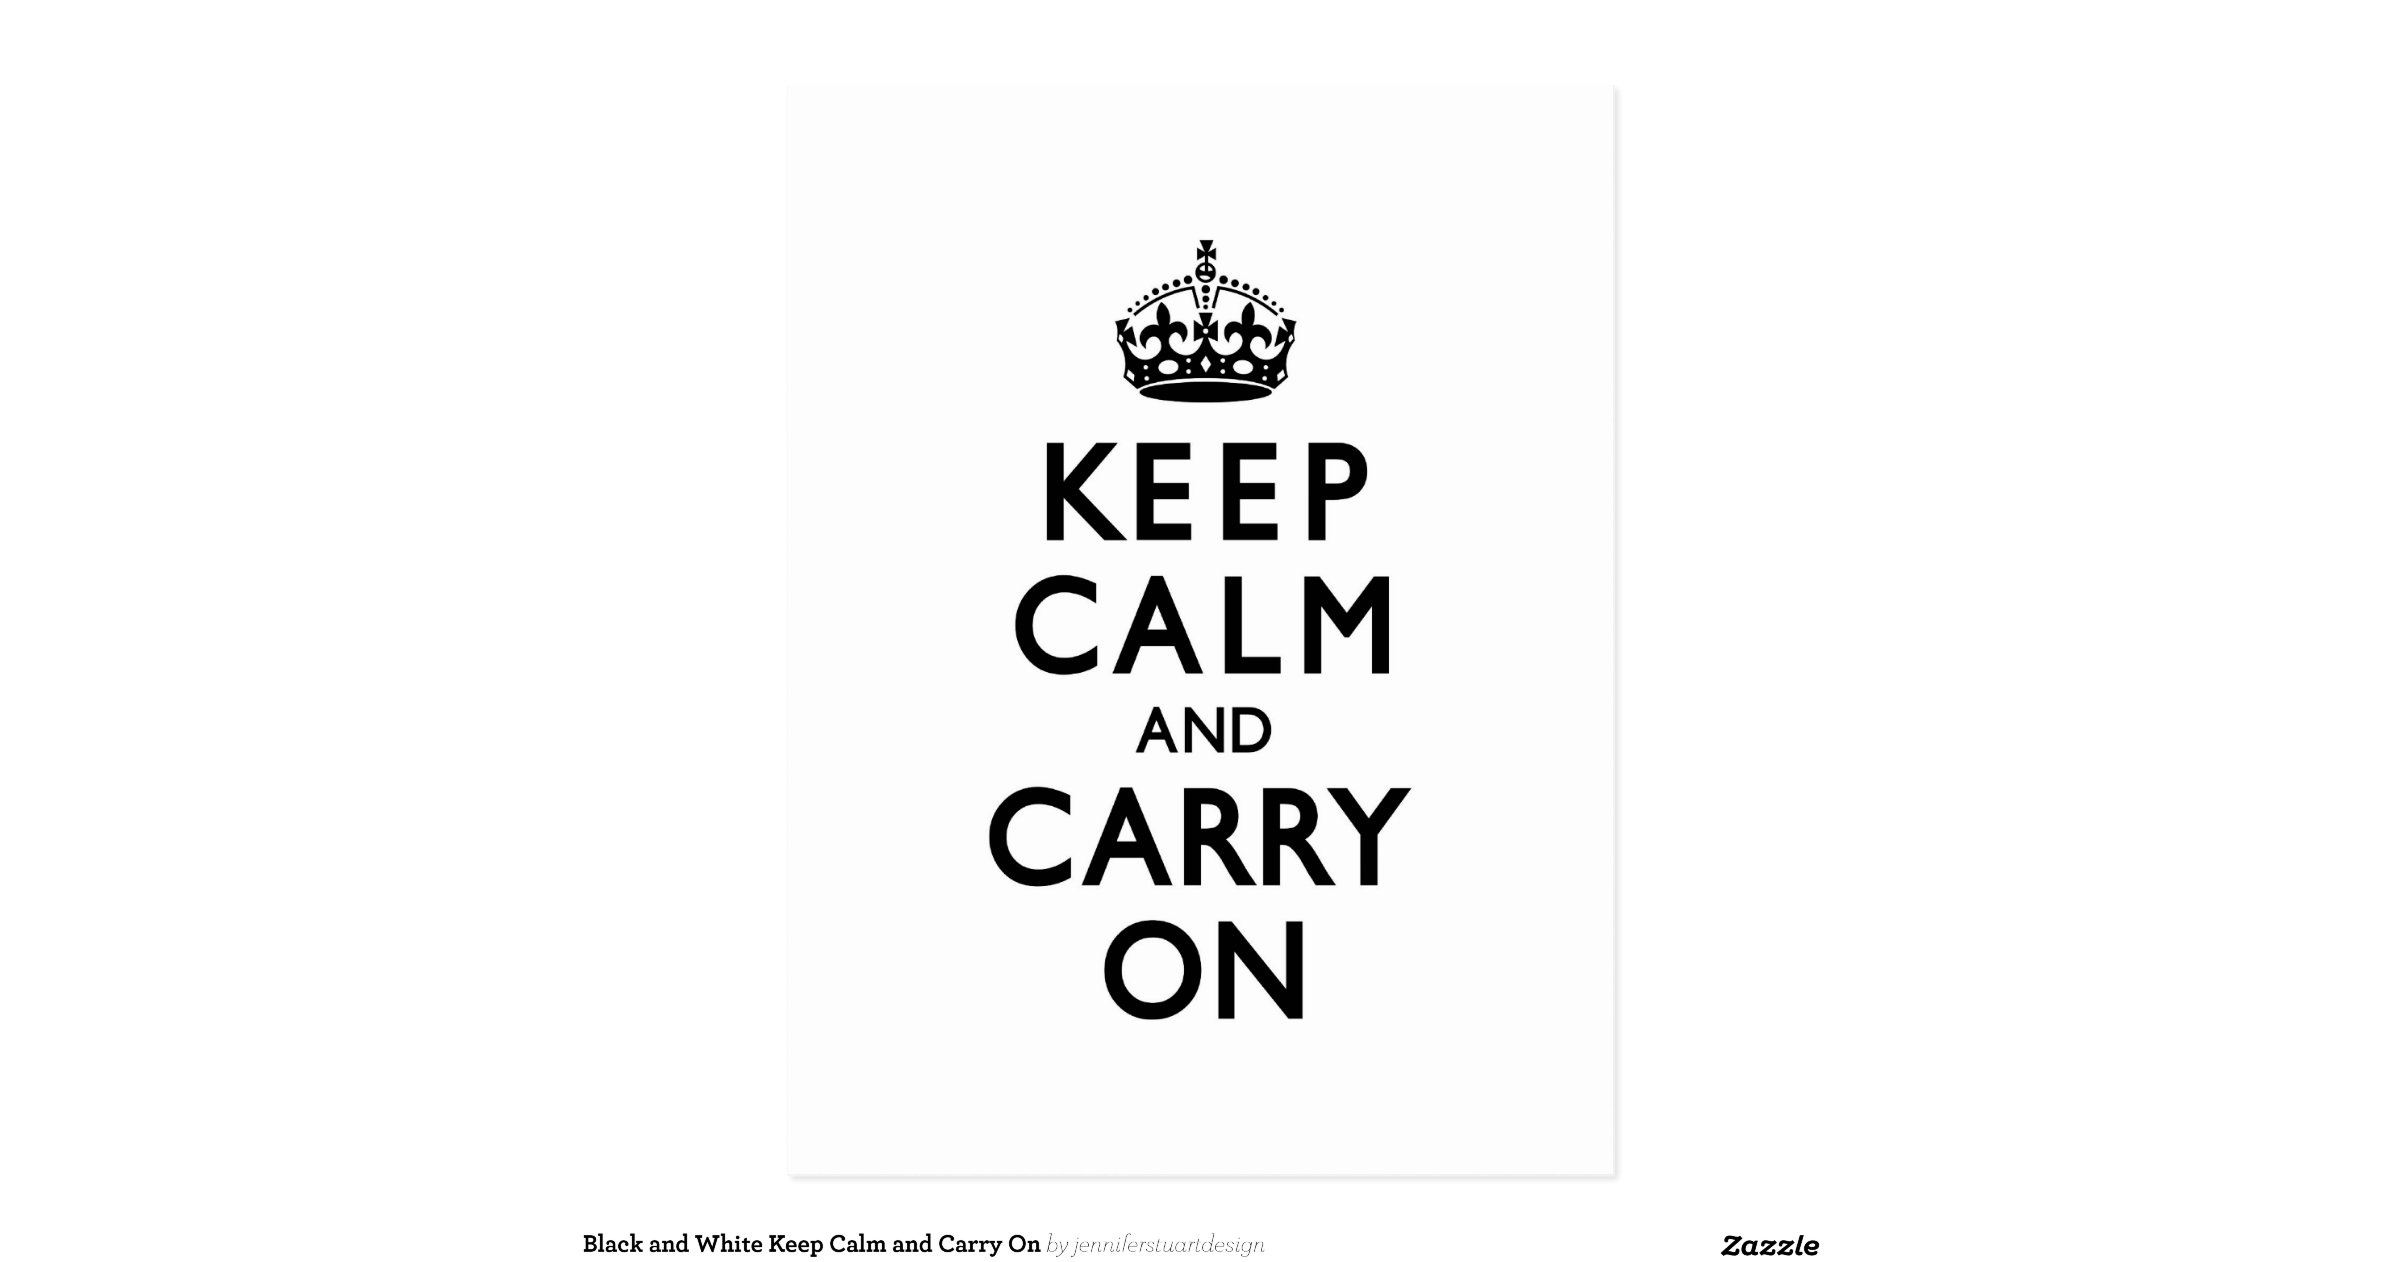 Black and White Keep Calm and Carry On Postcard | Zazzle